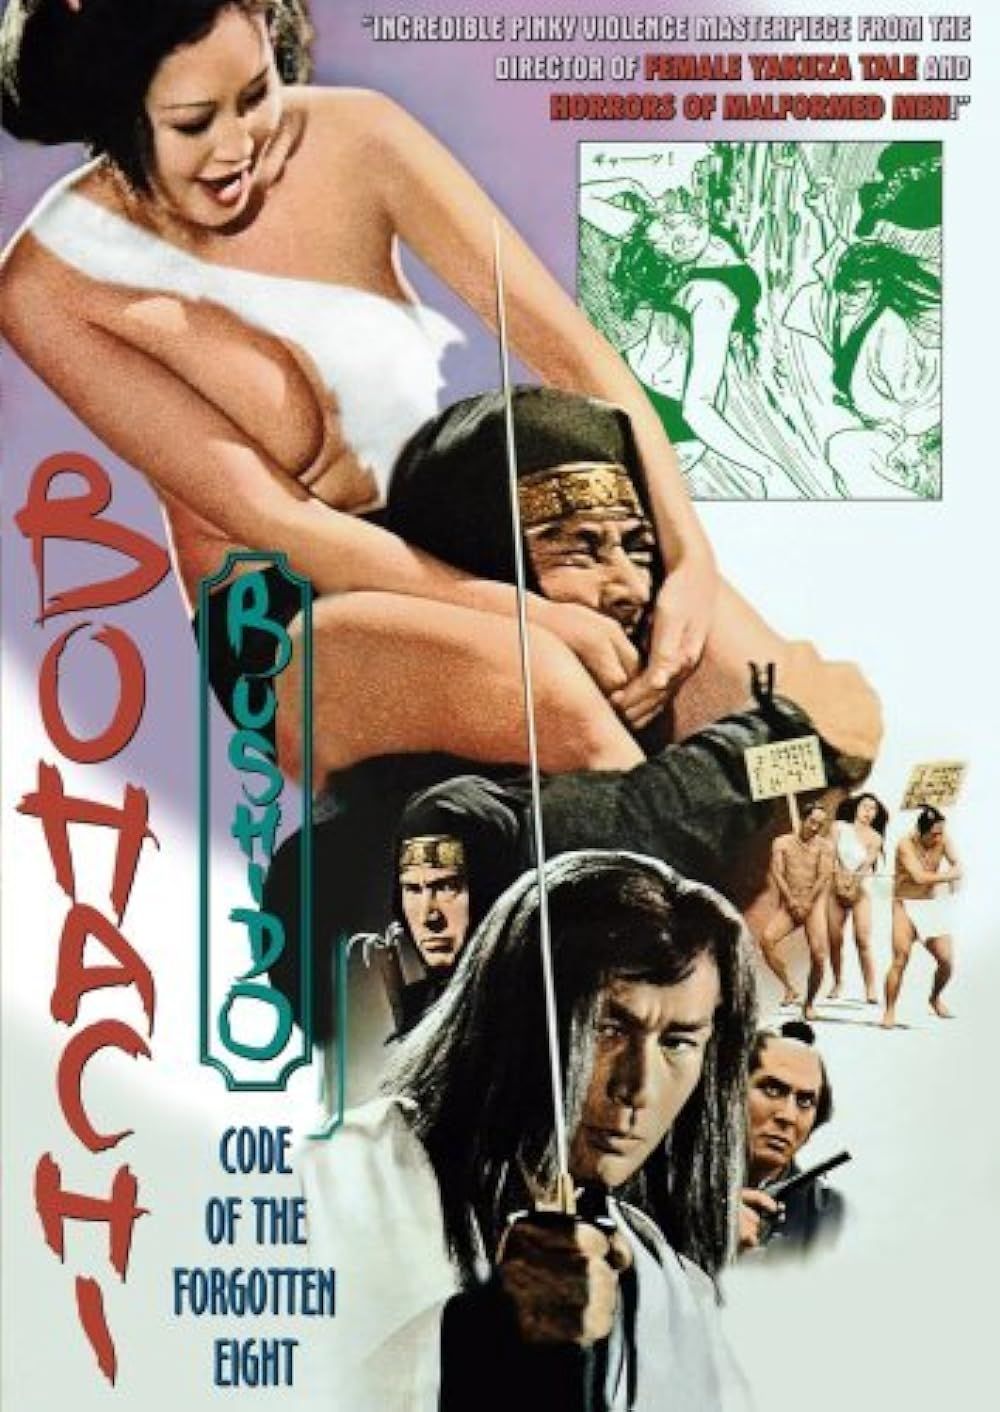 [18＋] Boachi Bushido Code of the Forgotten Eight (1973) UNRATED Movie download full movie